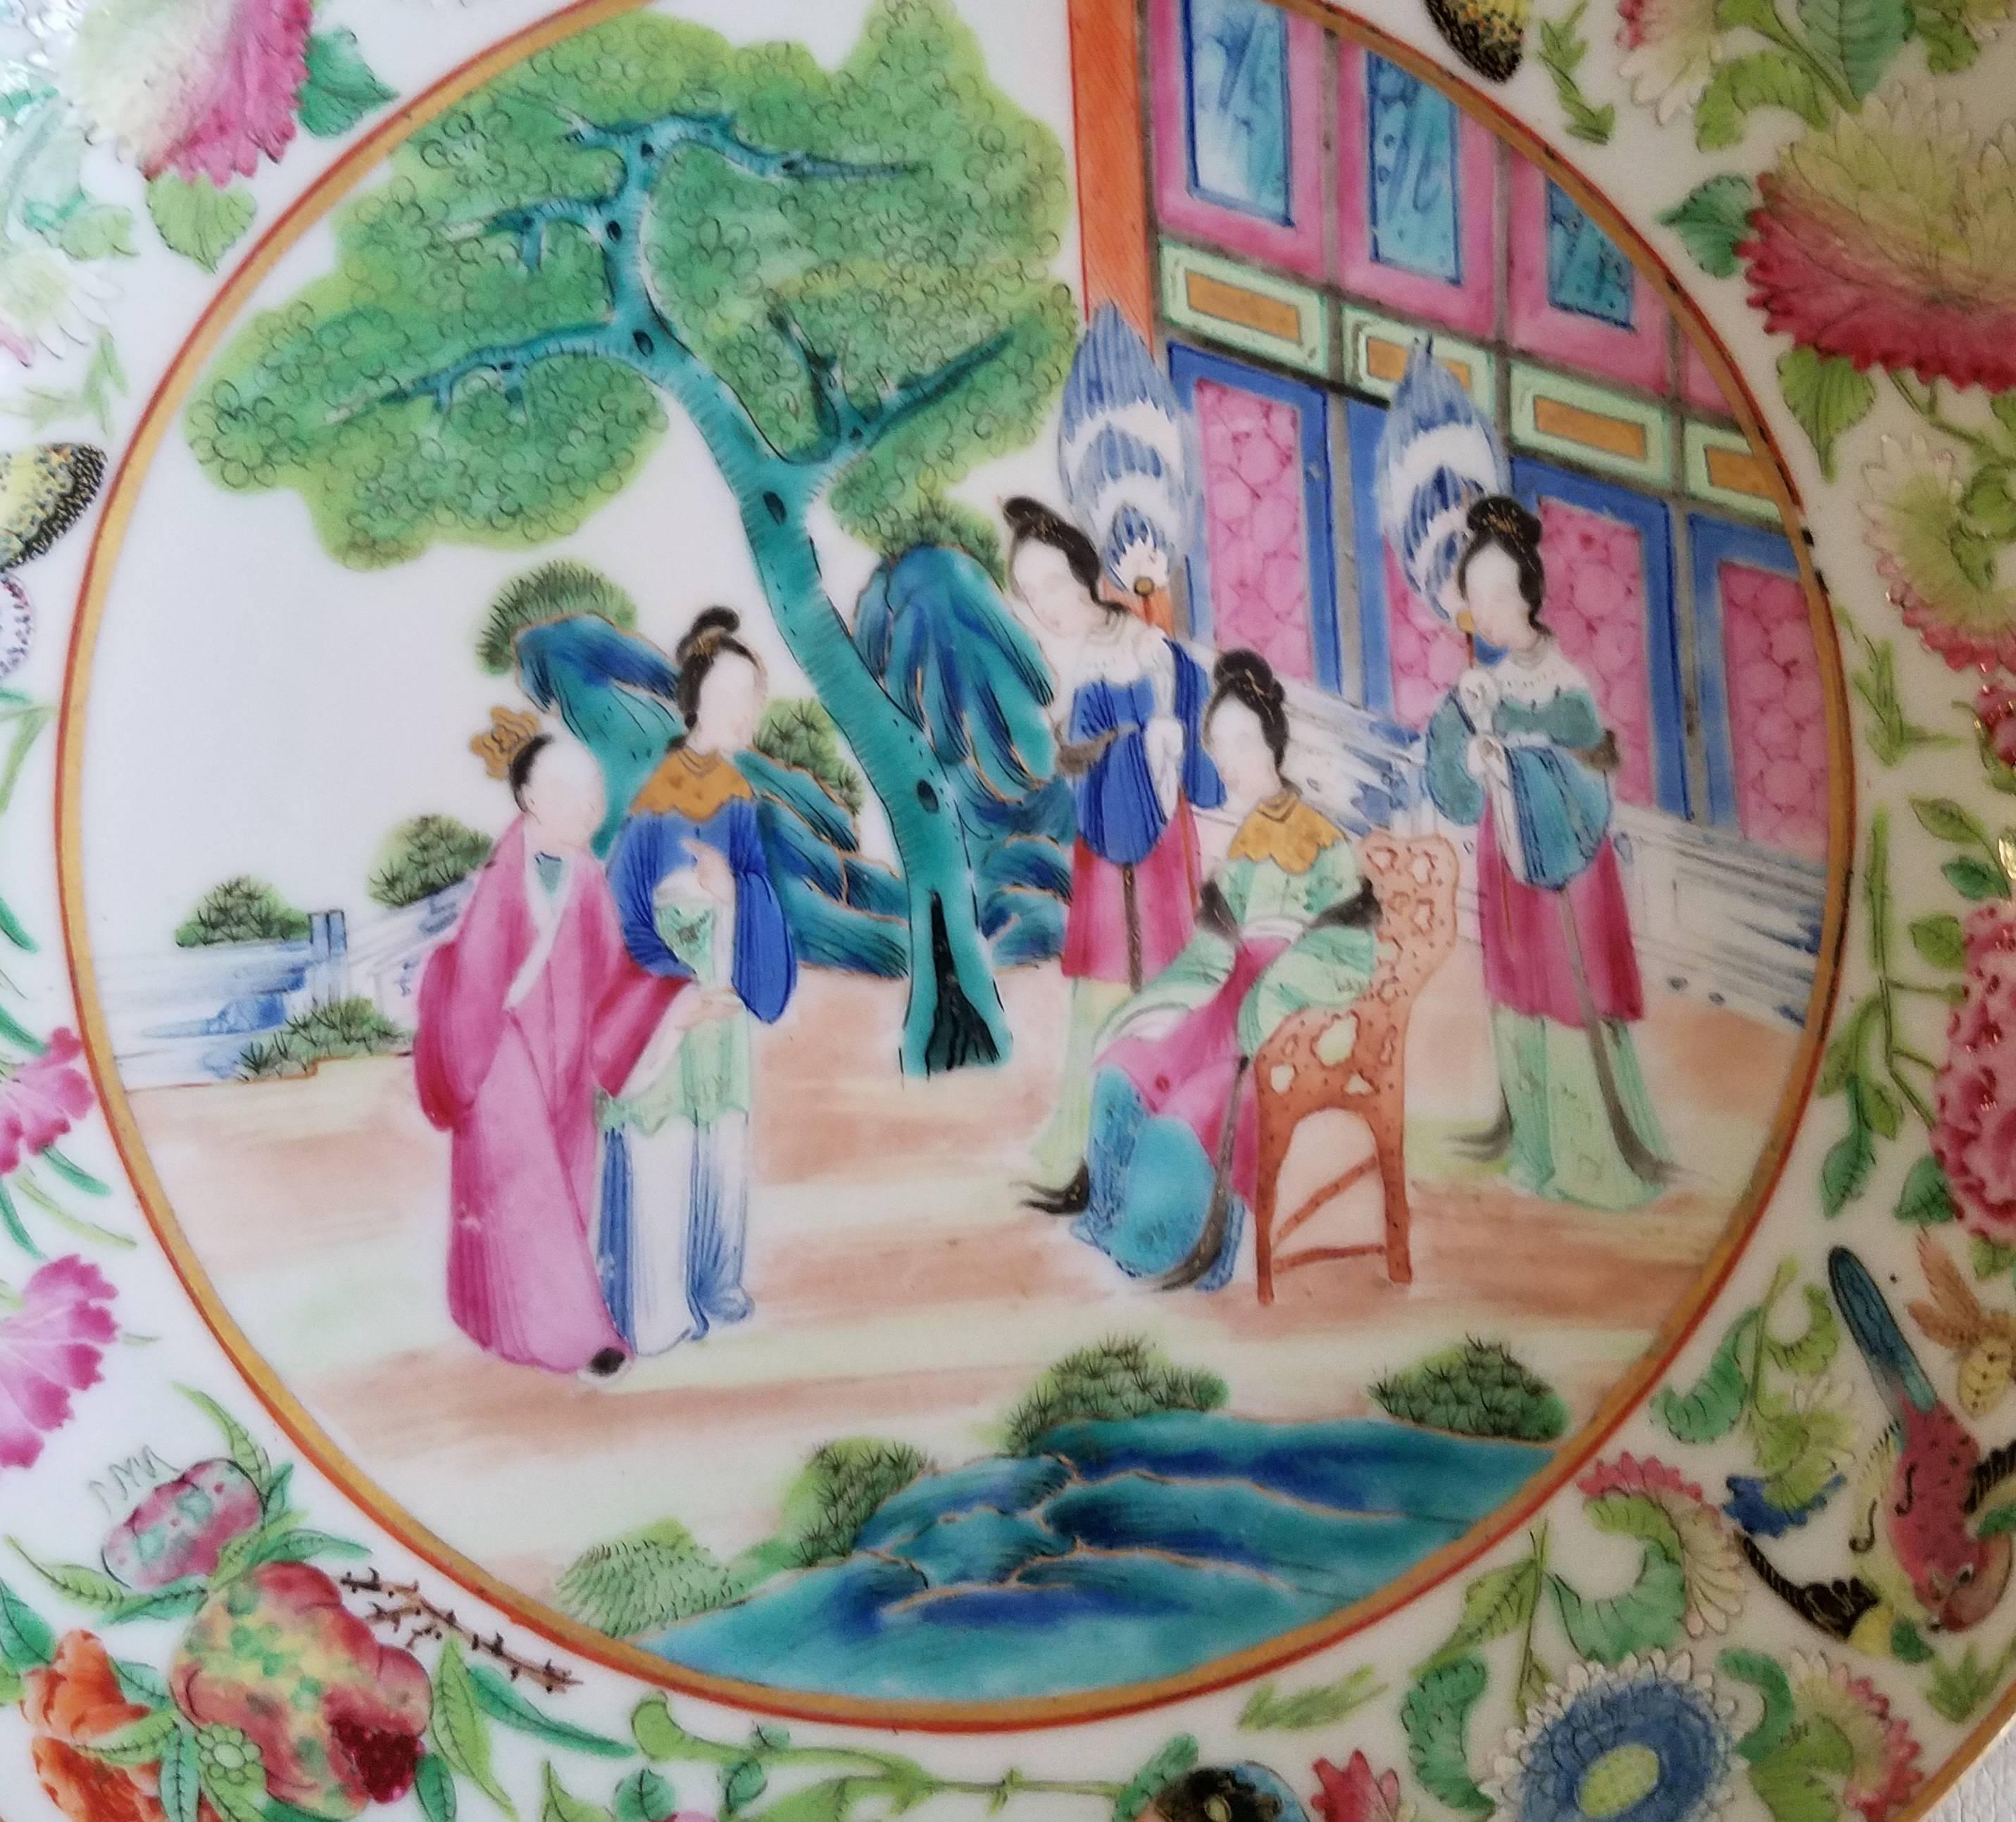 The sauce dish finely painted with Mandarin figures in the central well and flowers and butterflies on the border.
 